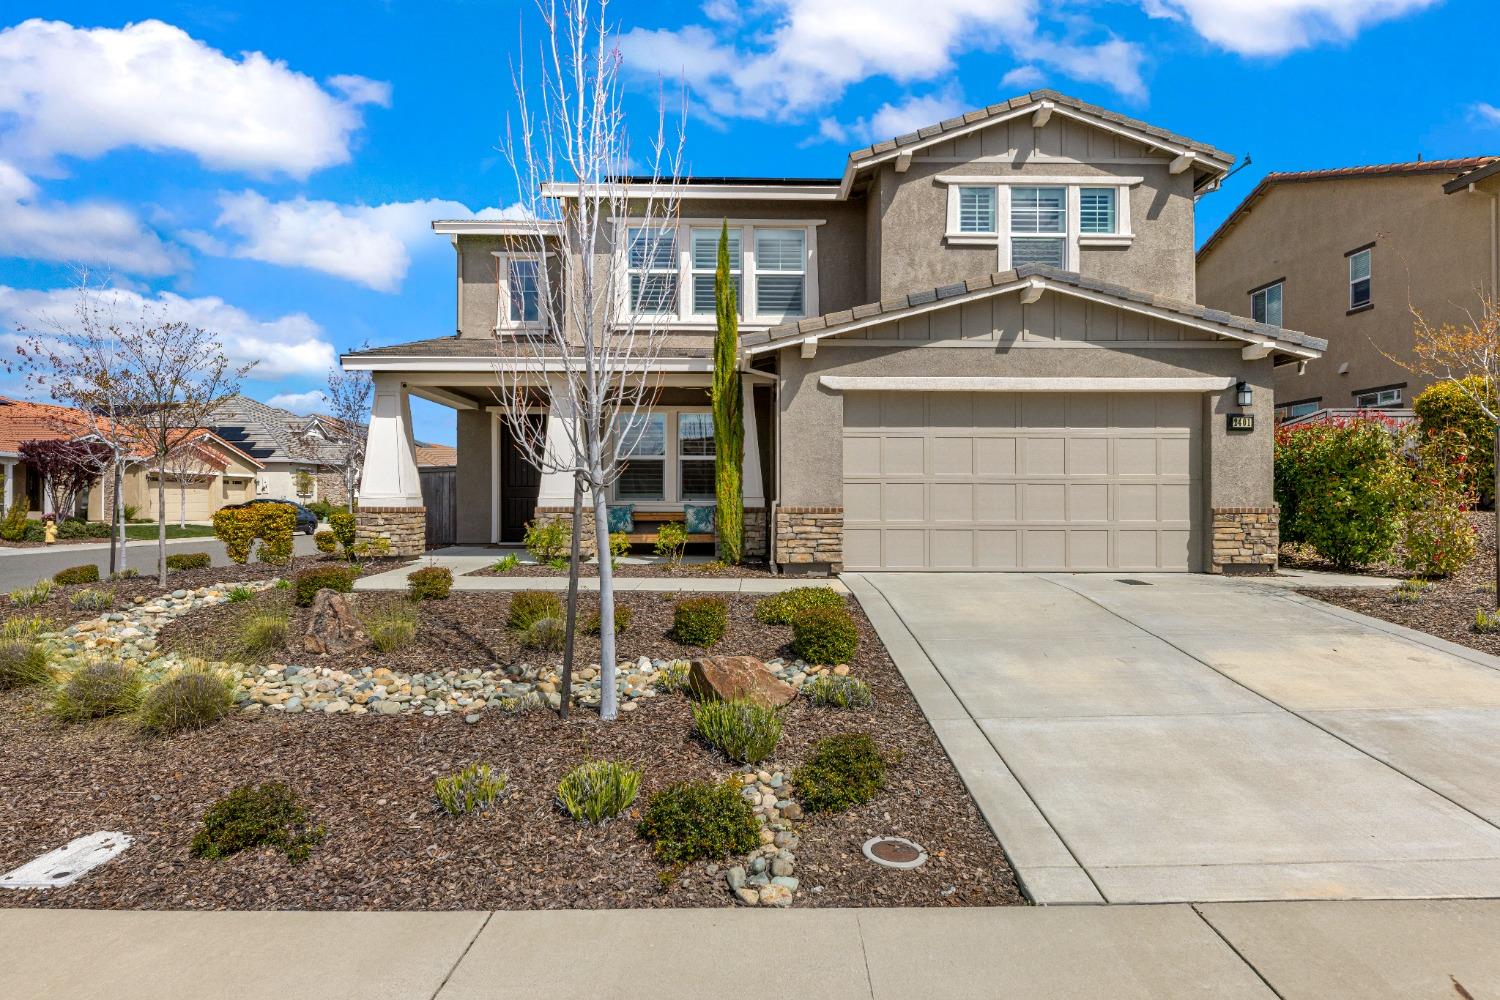 Photo of 2401 Galloping Trail Ct in Rocklin, CA